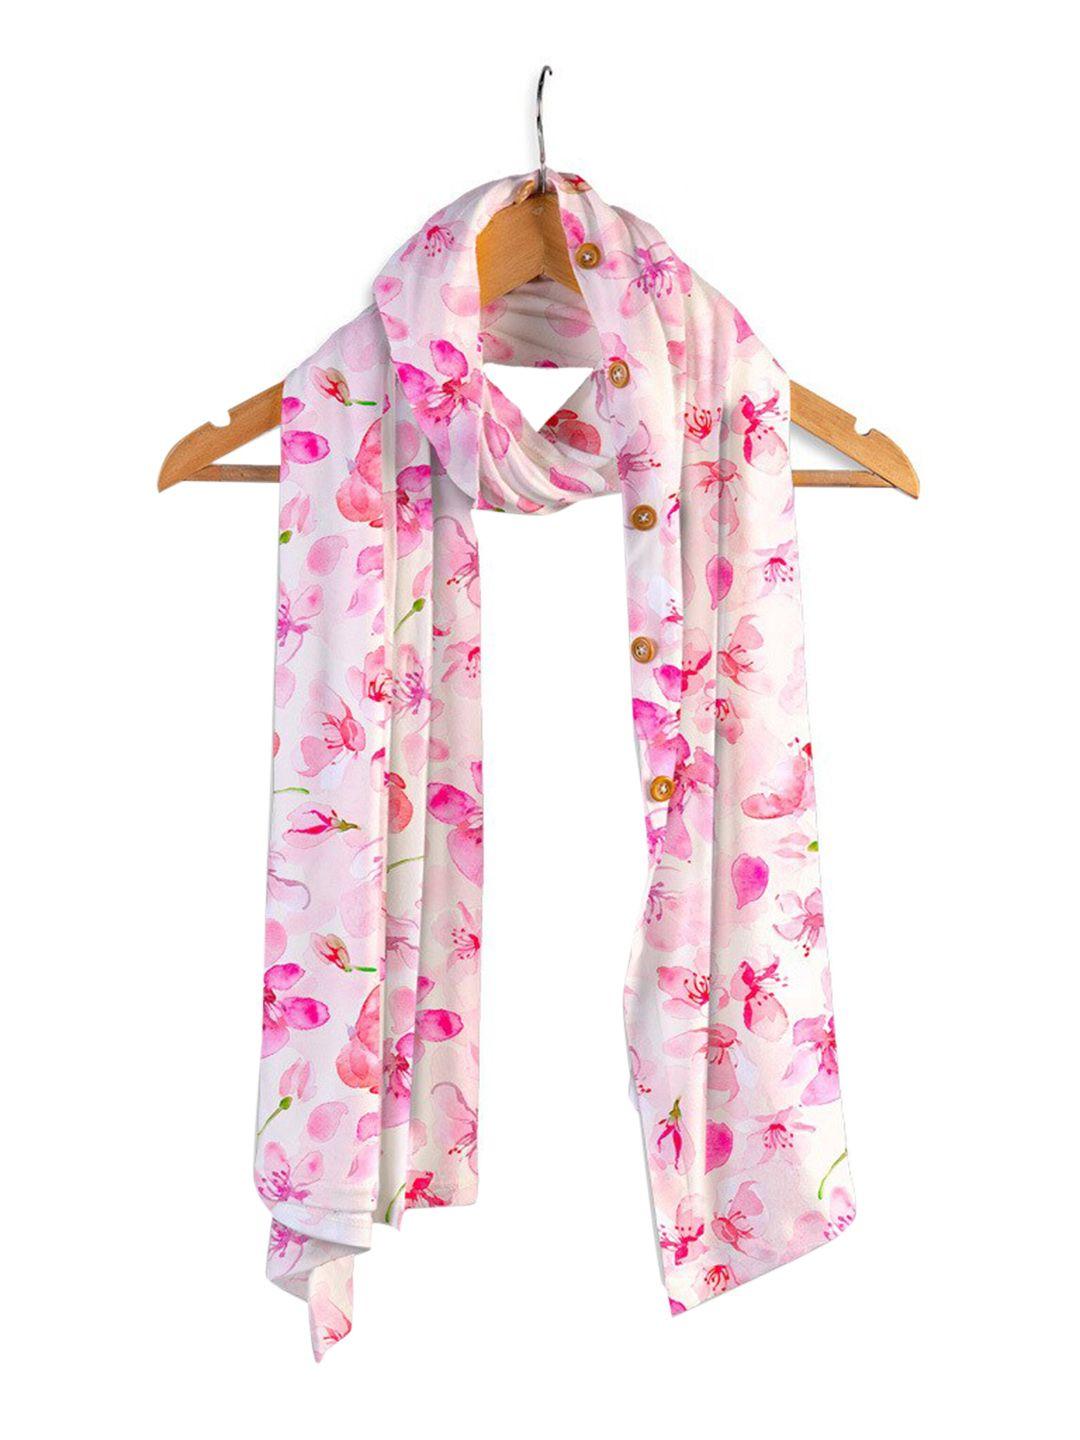 superbottoms women pink & white floral printed sustainable modal nursing poncho